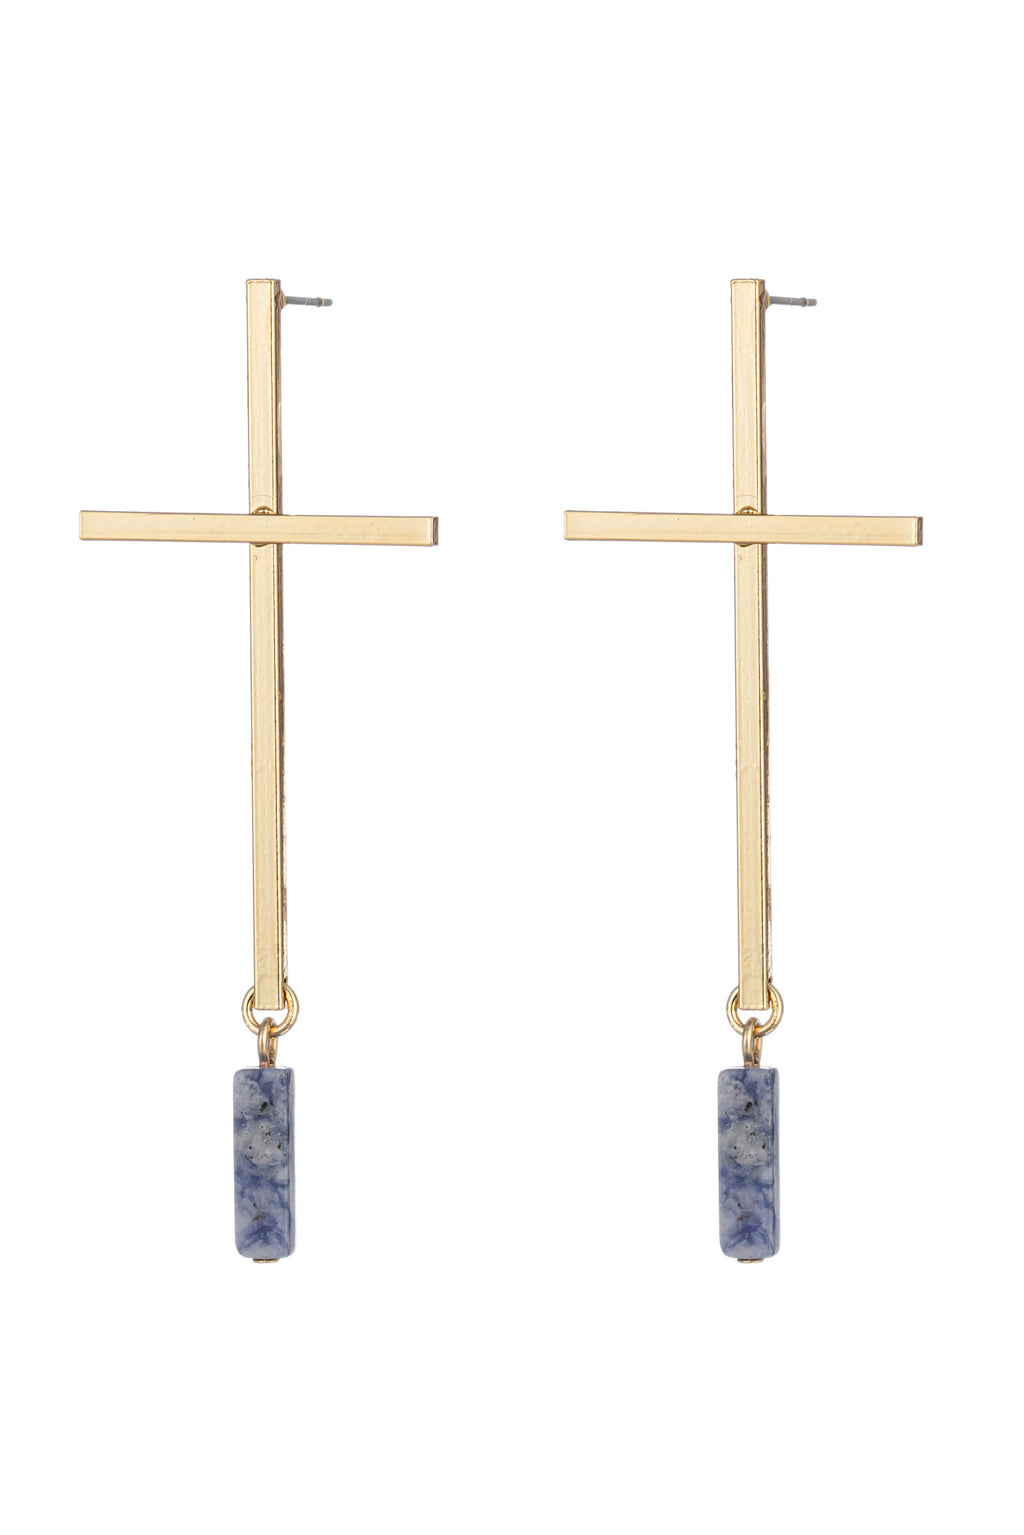 Gold alloy cross earrings with dangling lapis stones.